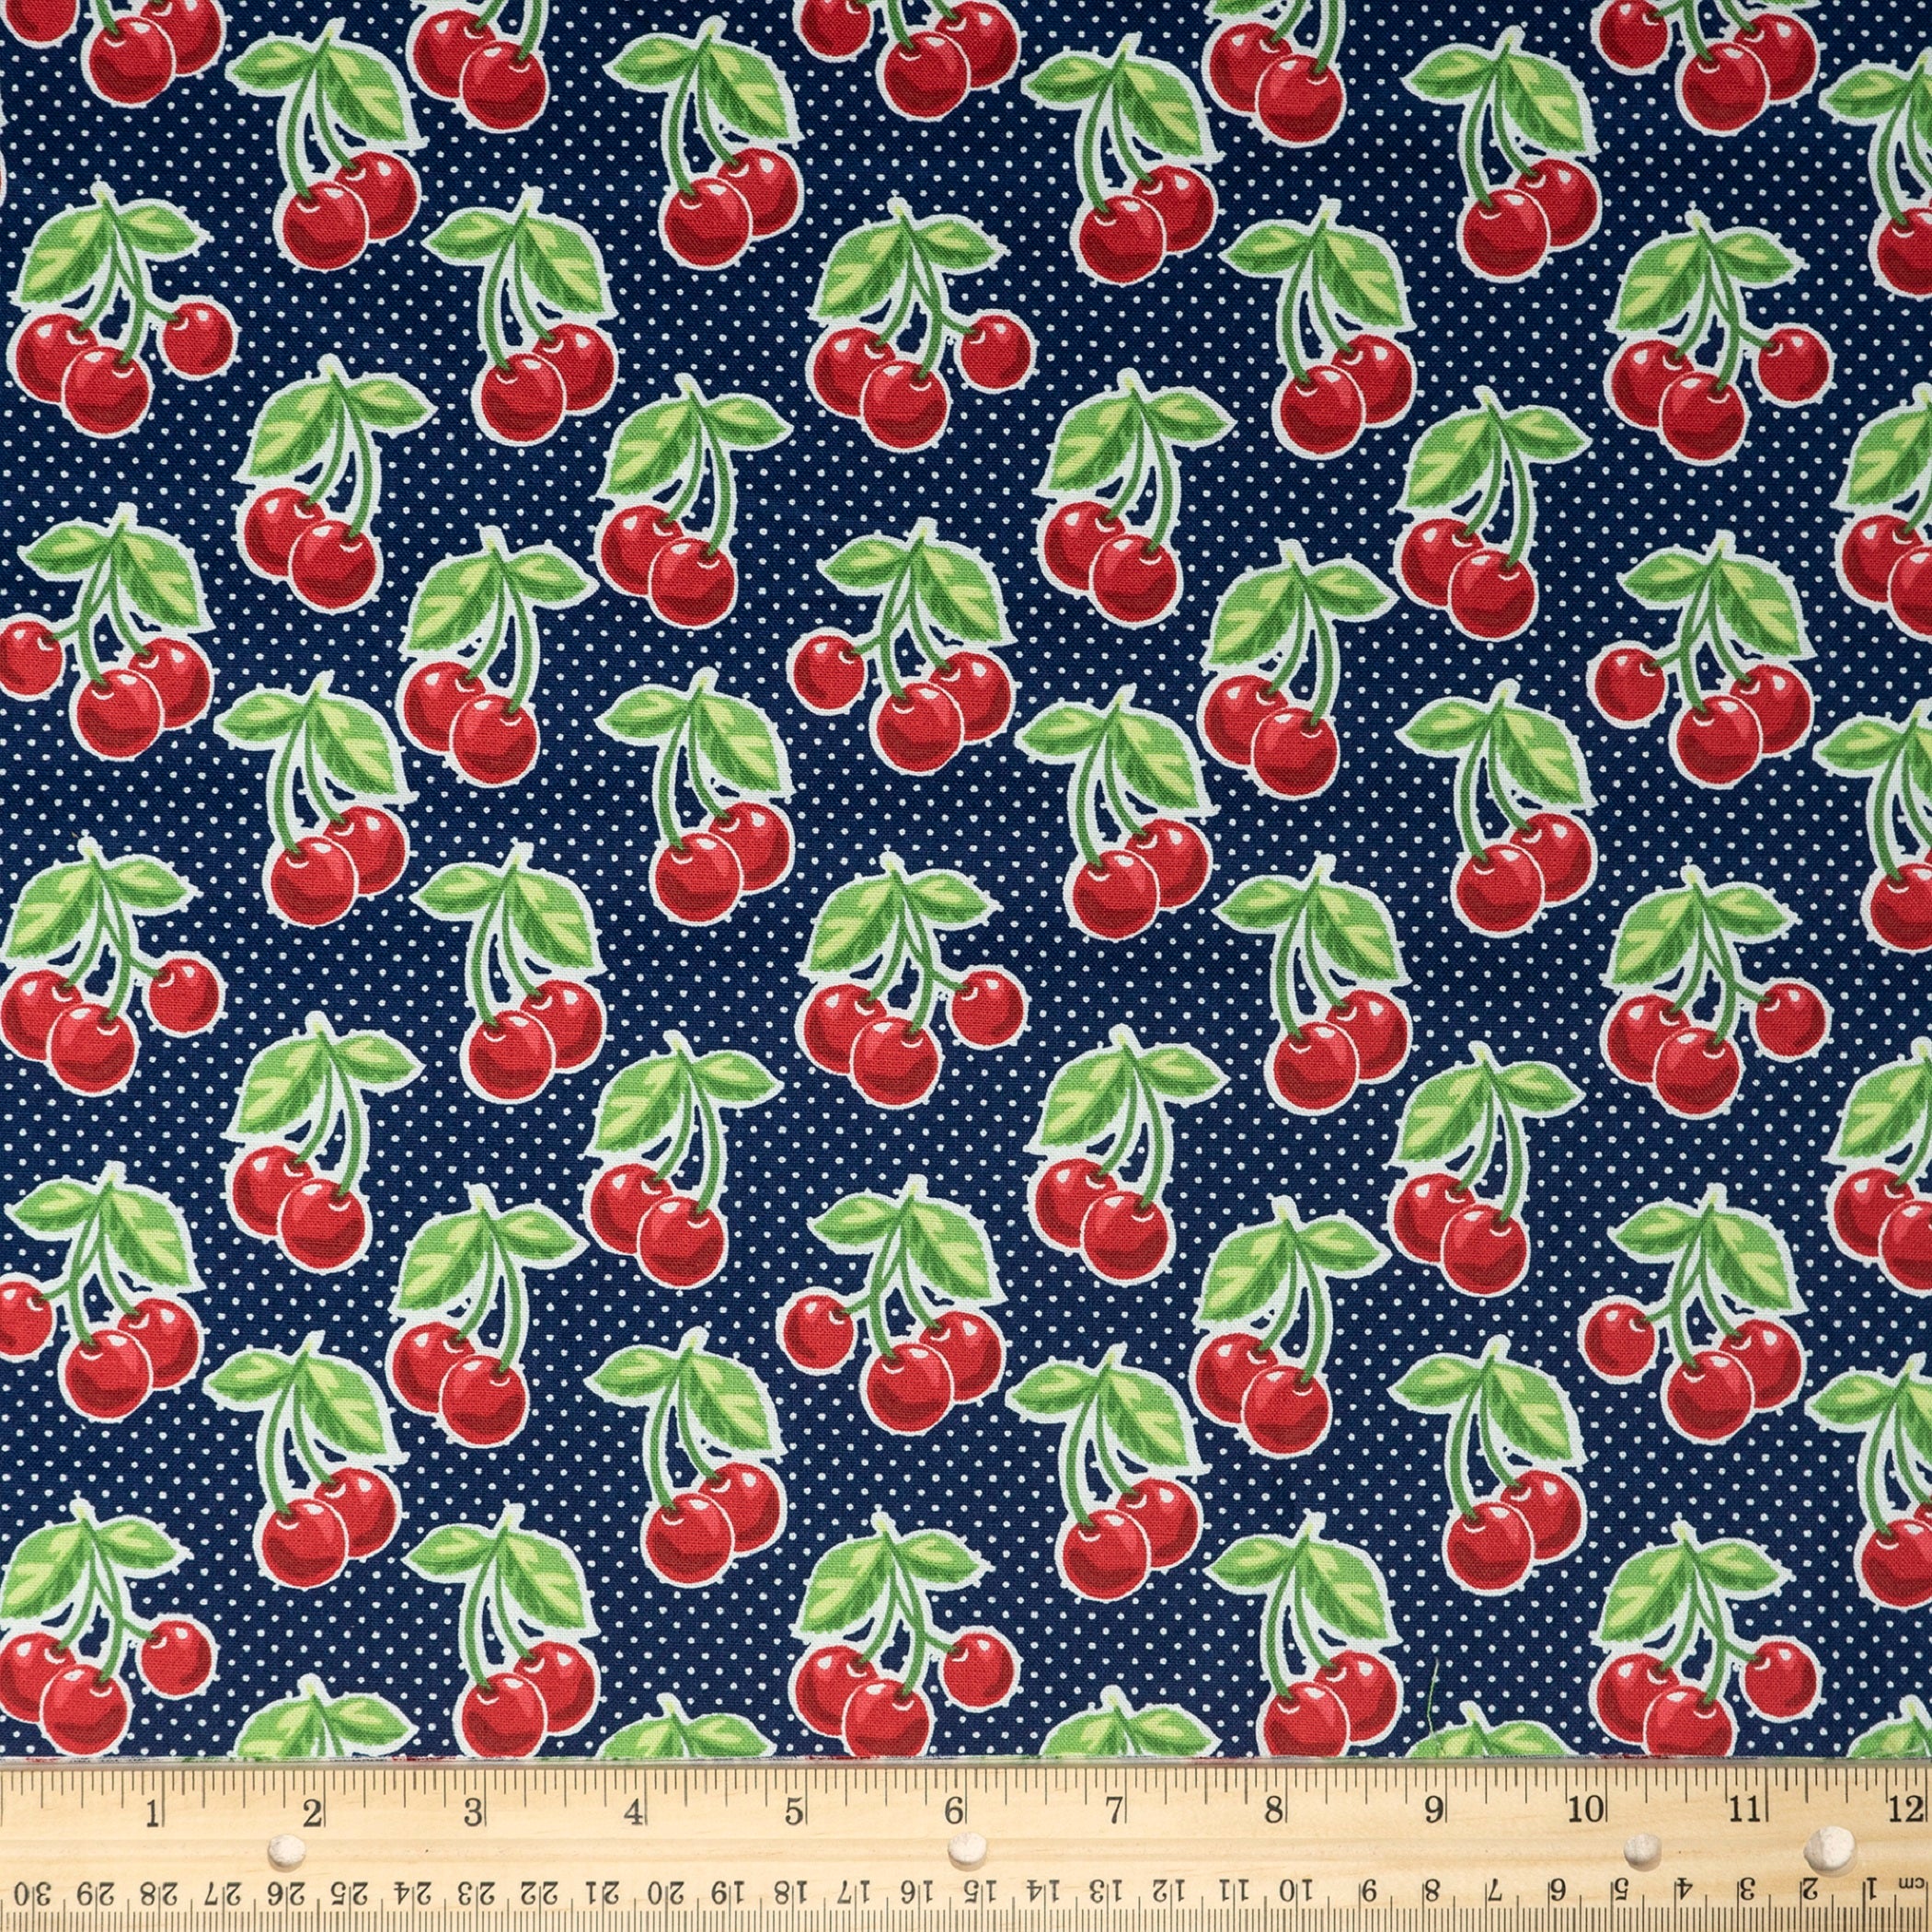 Waverly Inspirations Cotton 44" Anchor Cherries Ink Pint Color Sewing Fabric by the Yard